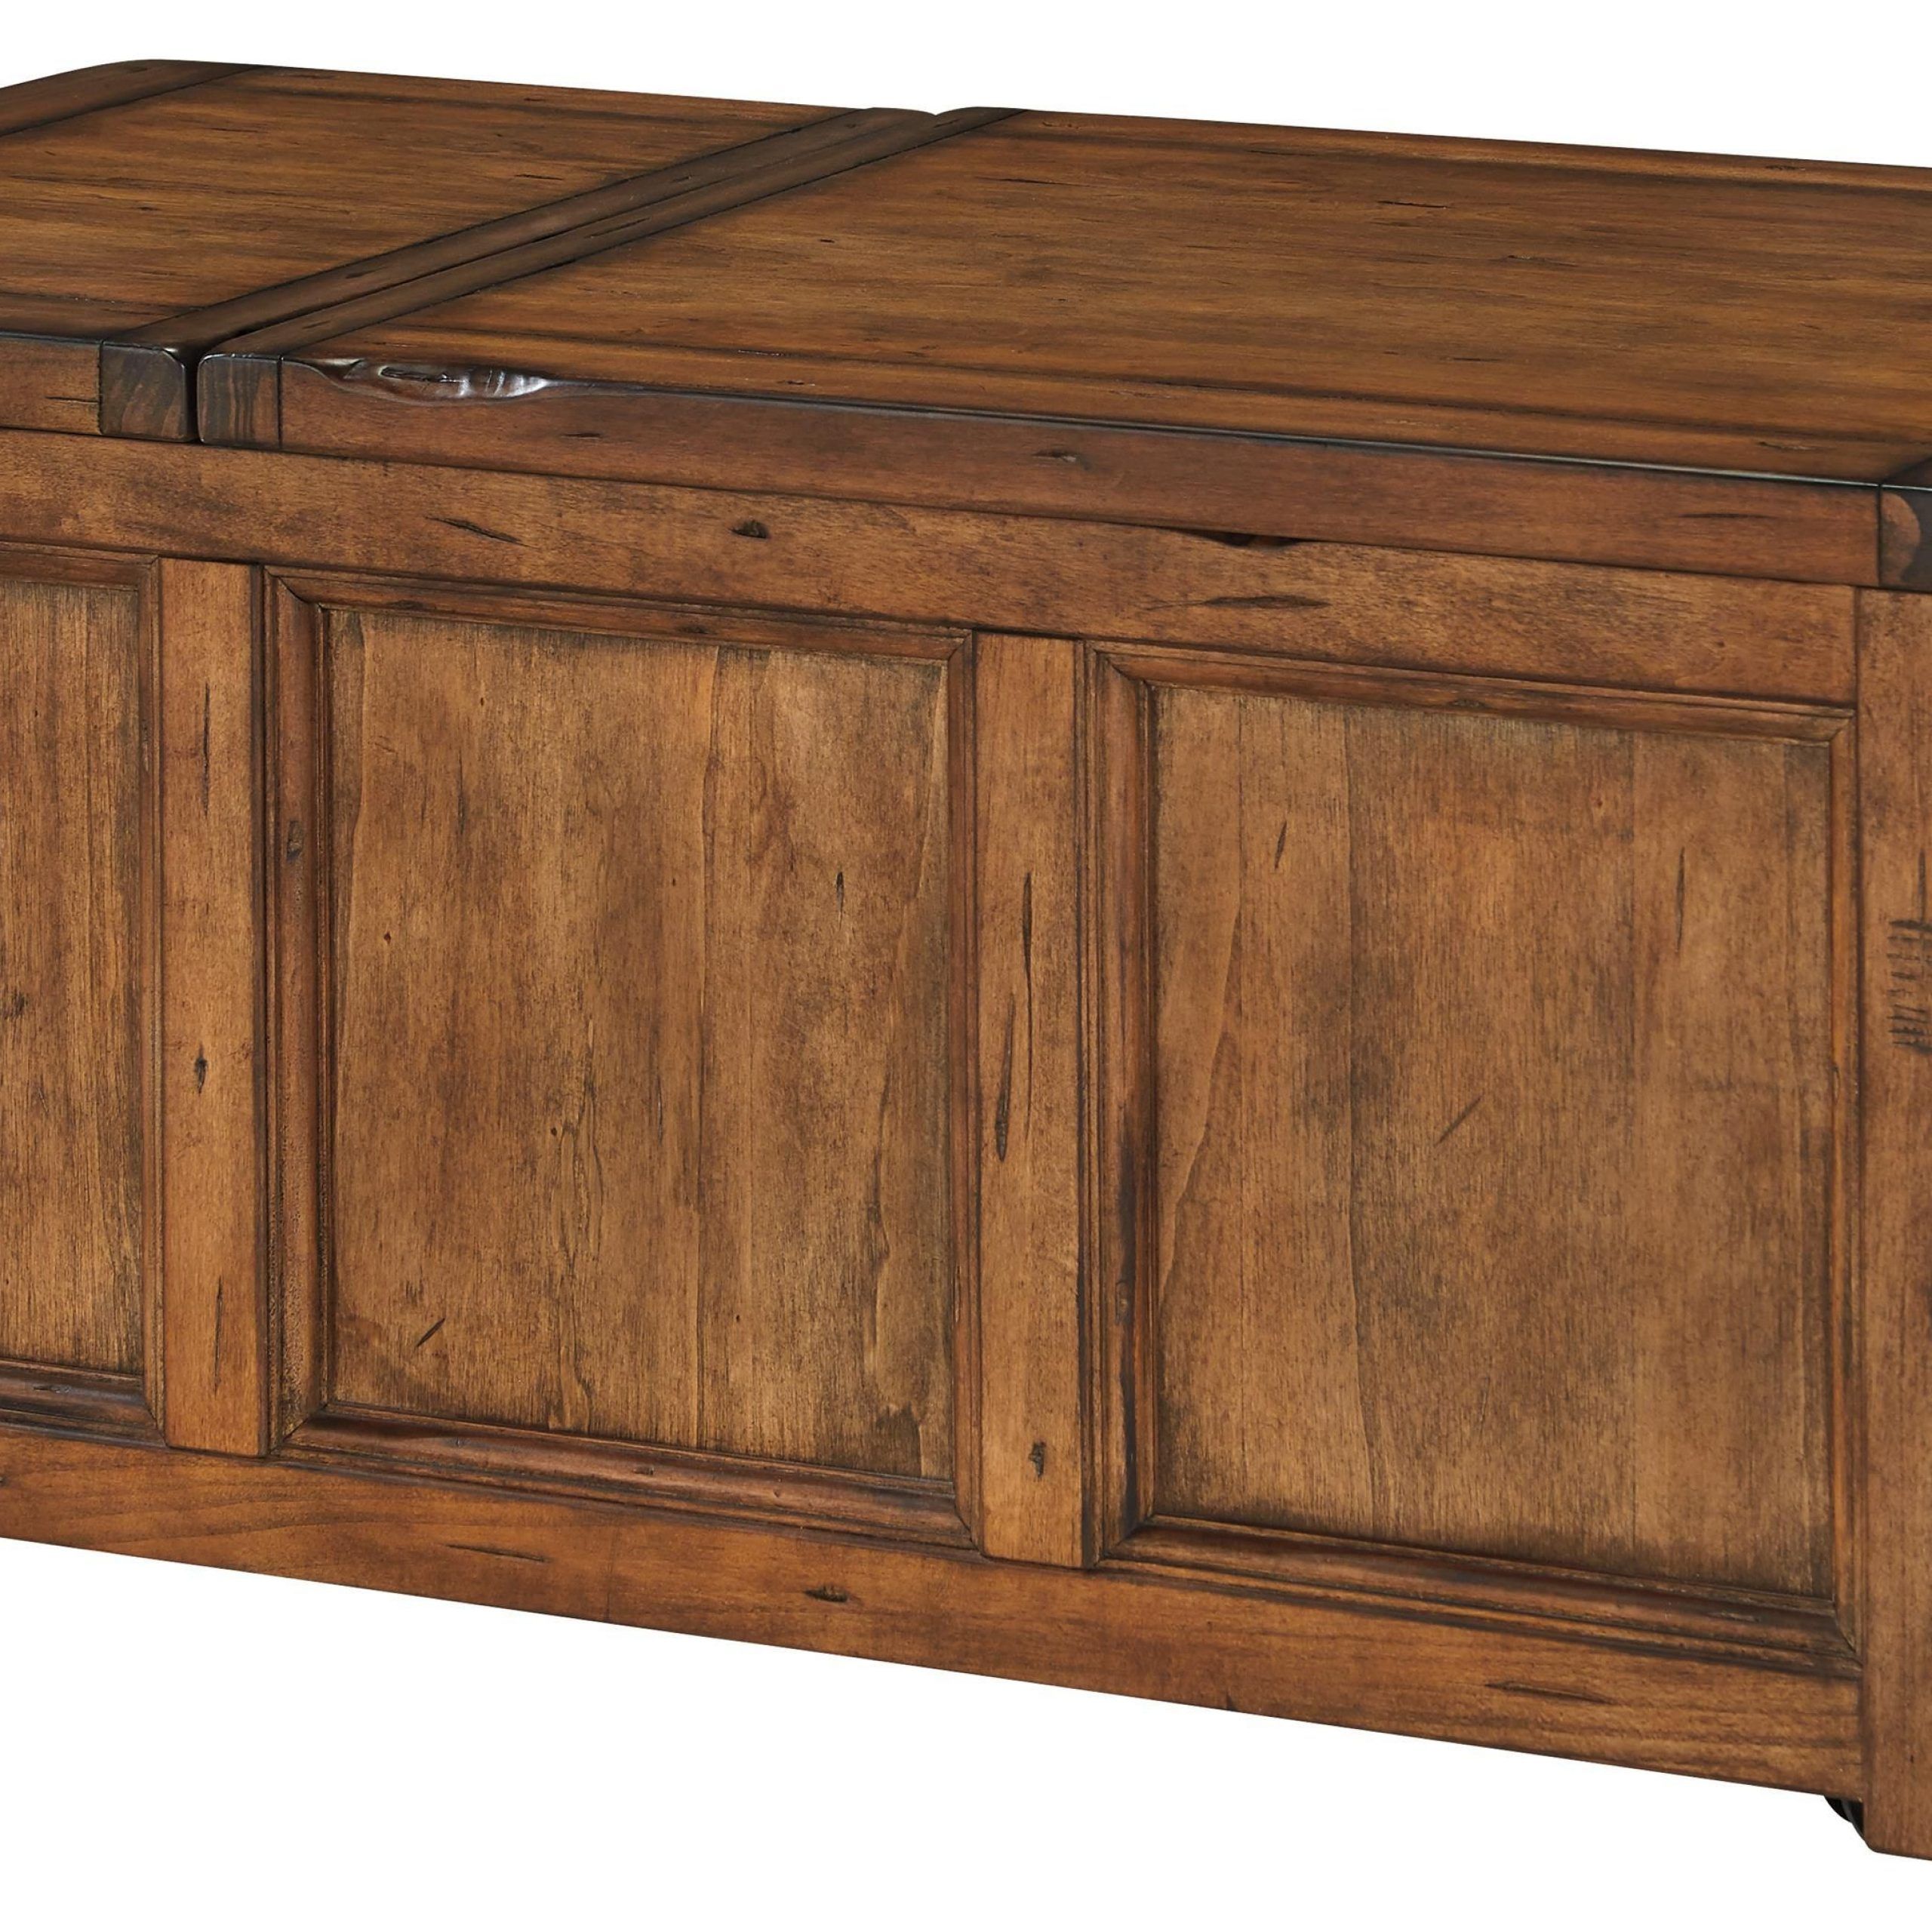 Tamonie Rustic Trunk Style Rectangular Lift Top Cocktail Inside Favorite Walnut Wood Storage Trunk Cocktail Tables (Gallery 4 of 20)